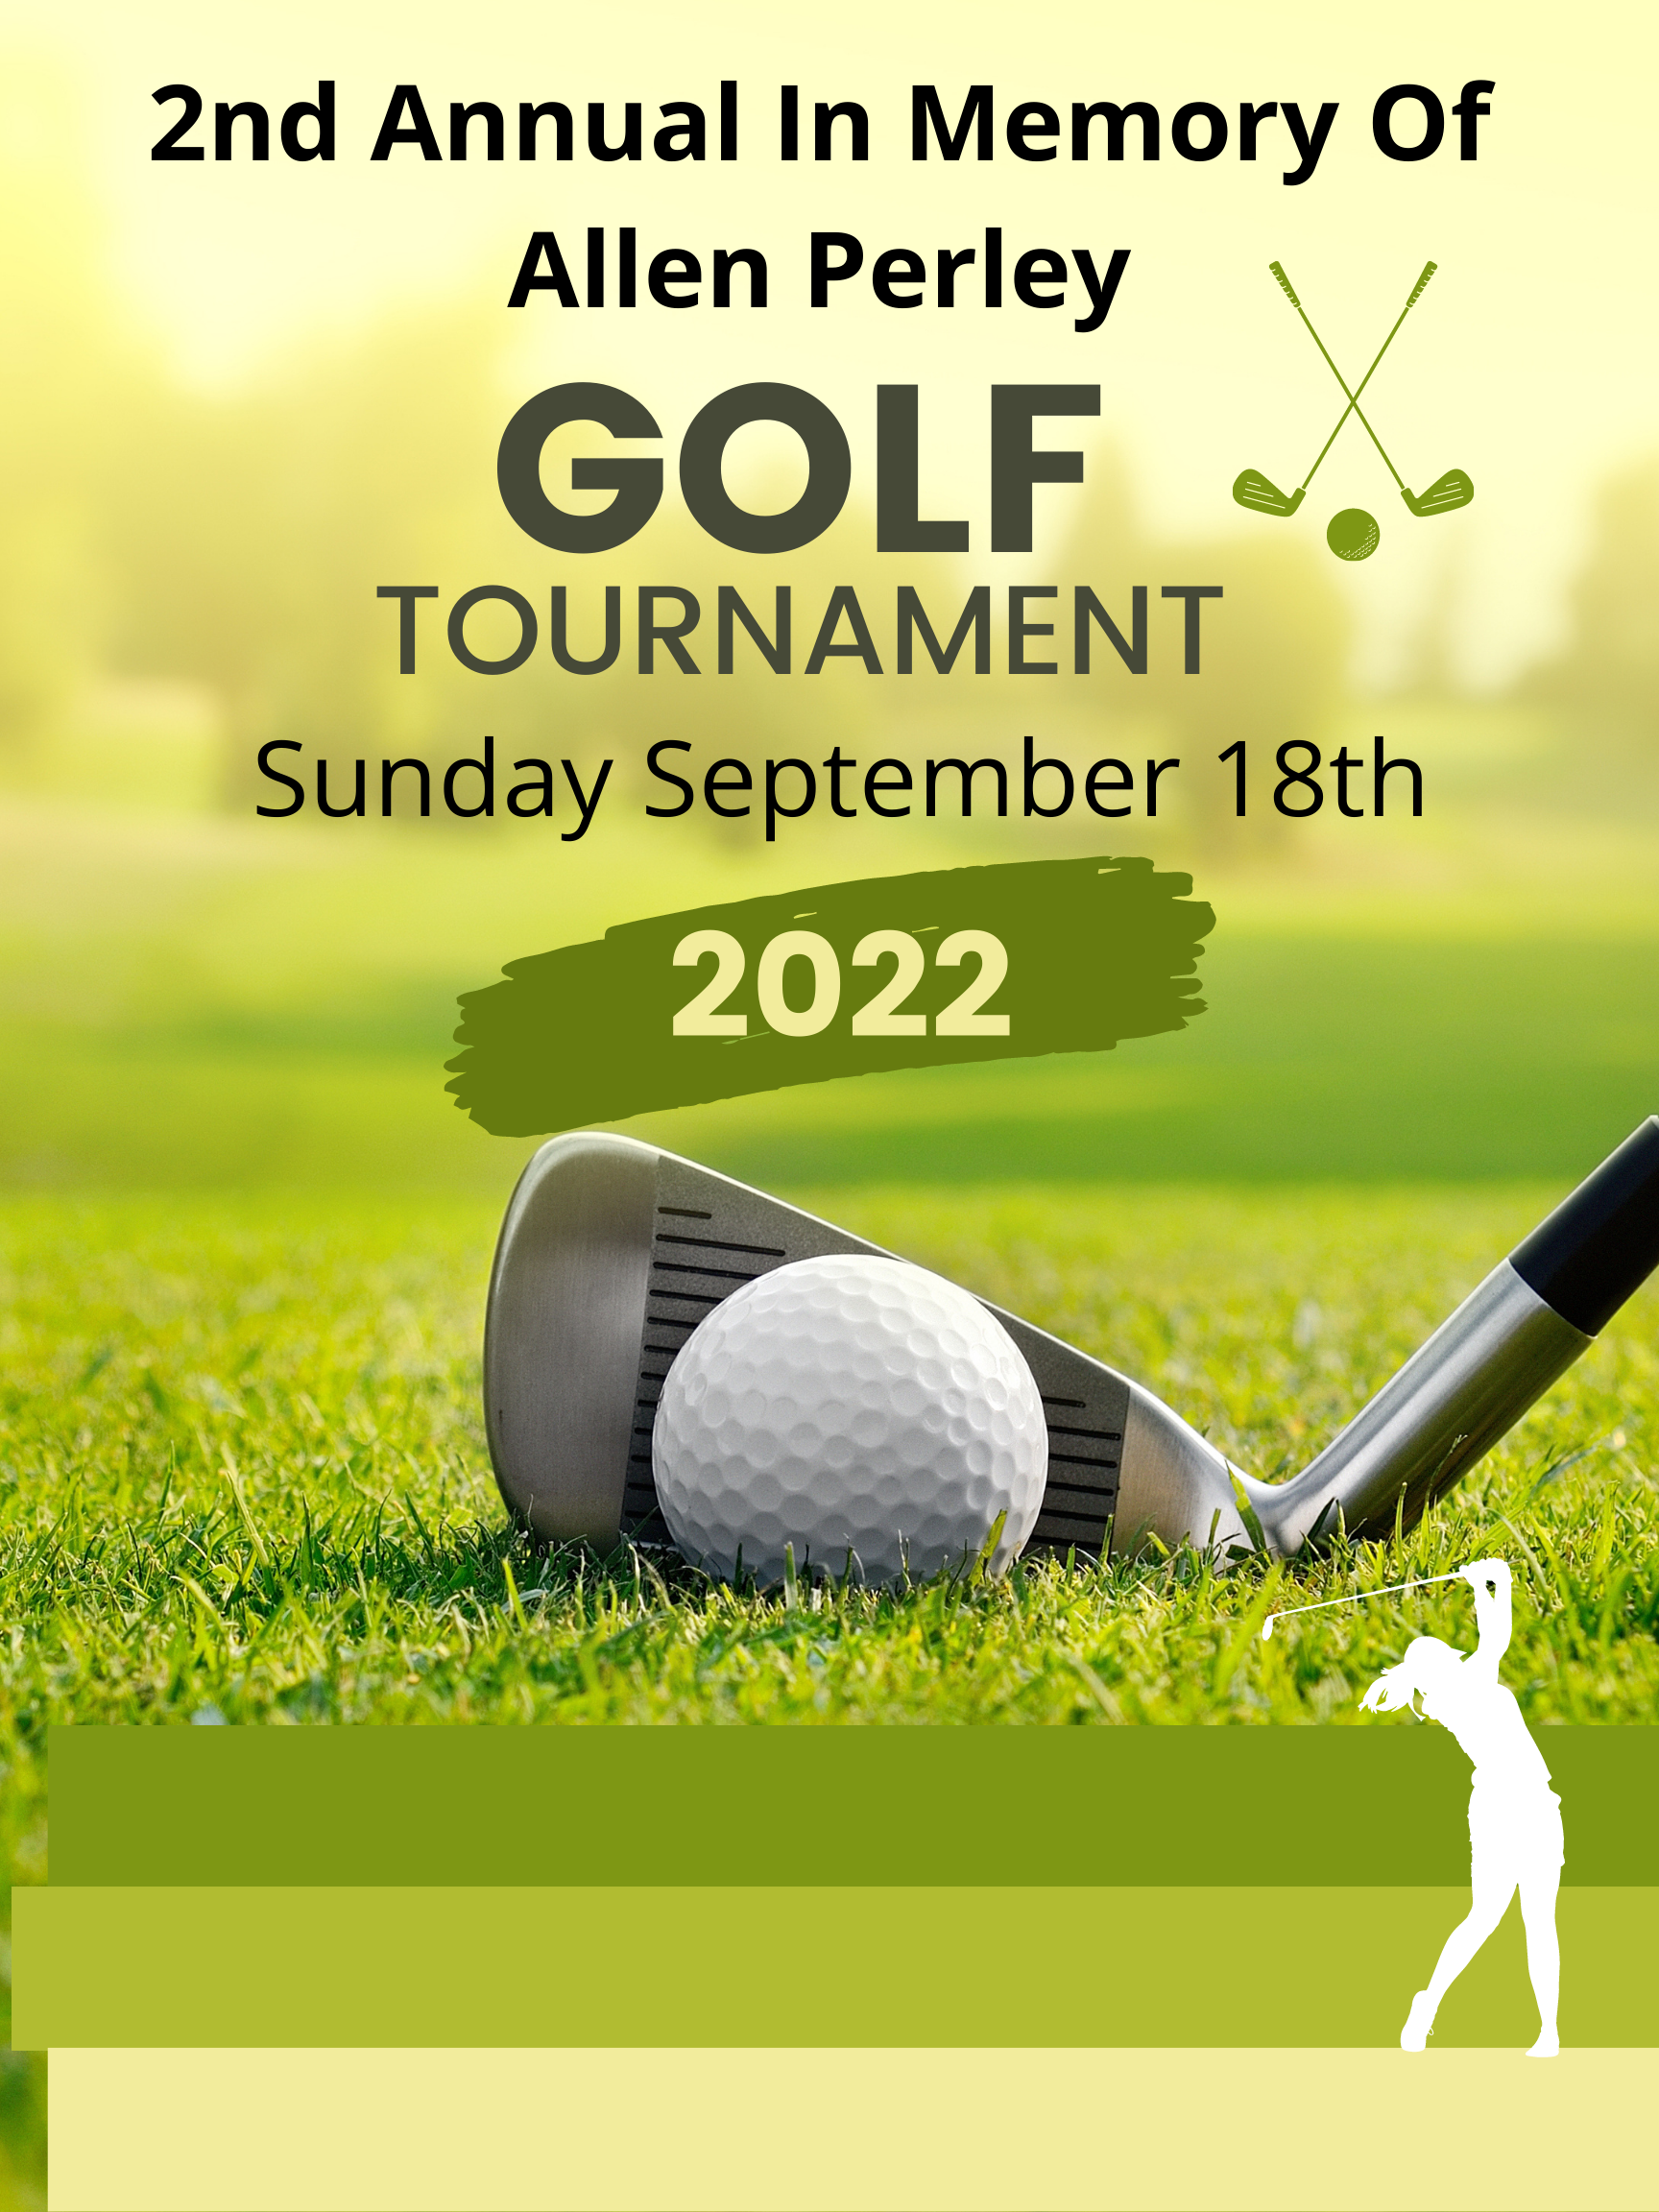 2nd Annual In Memory Of Allen Perley Golf Tournament